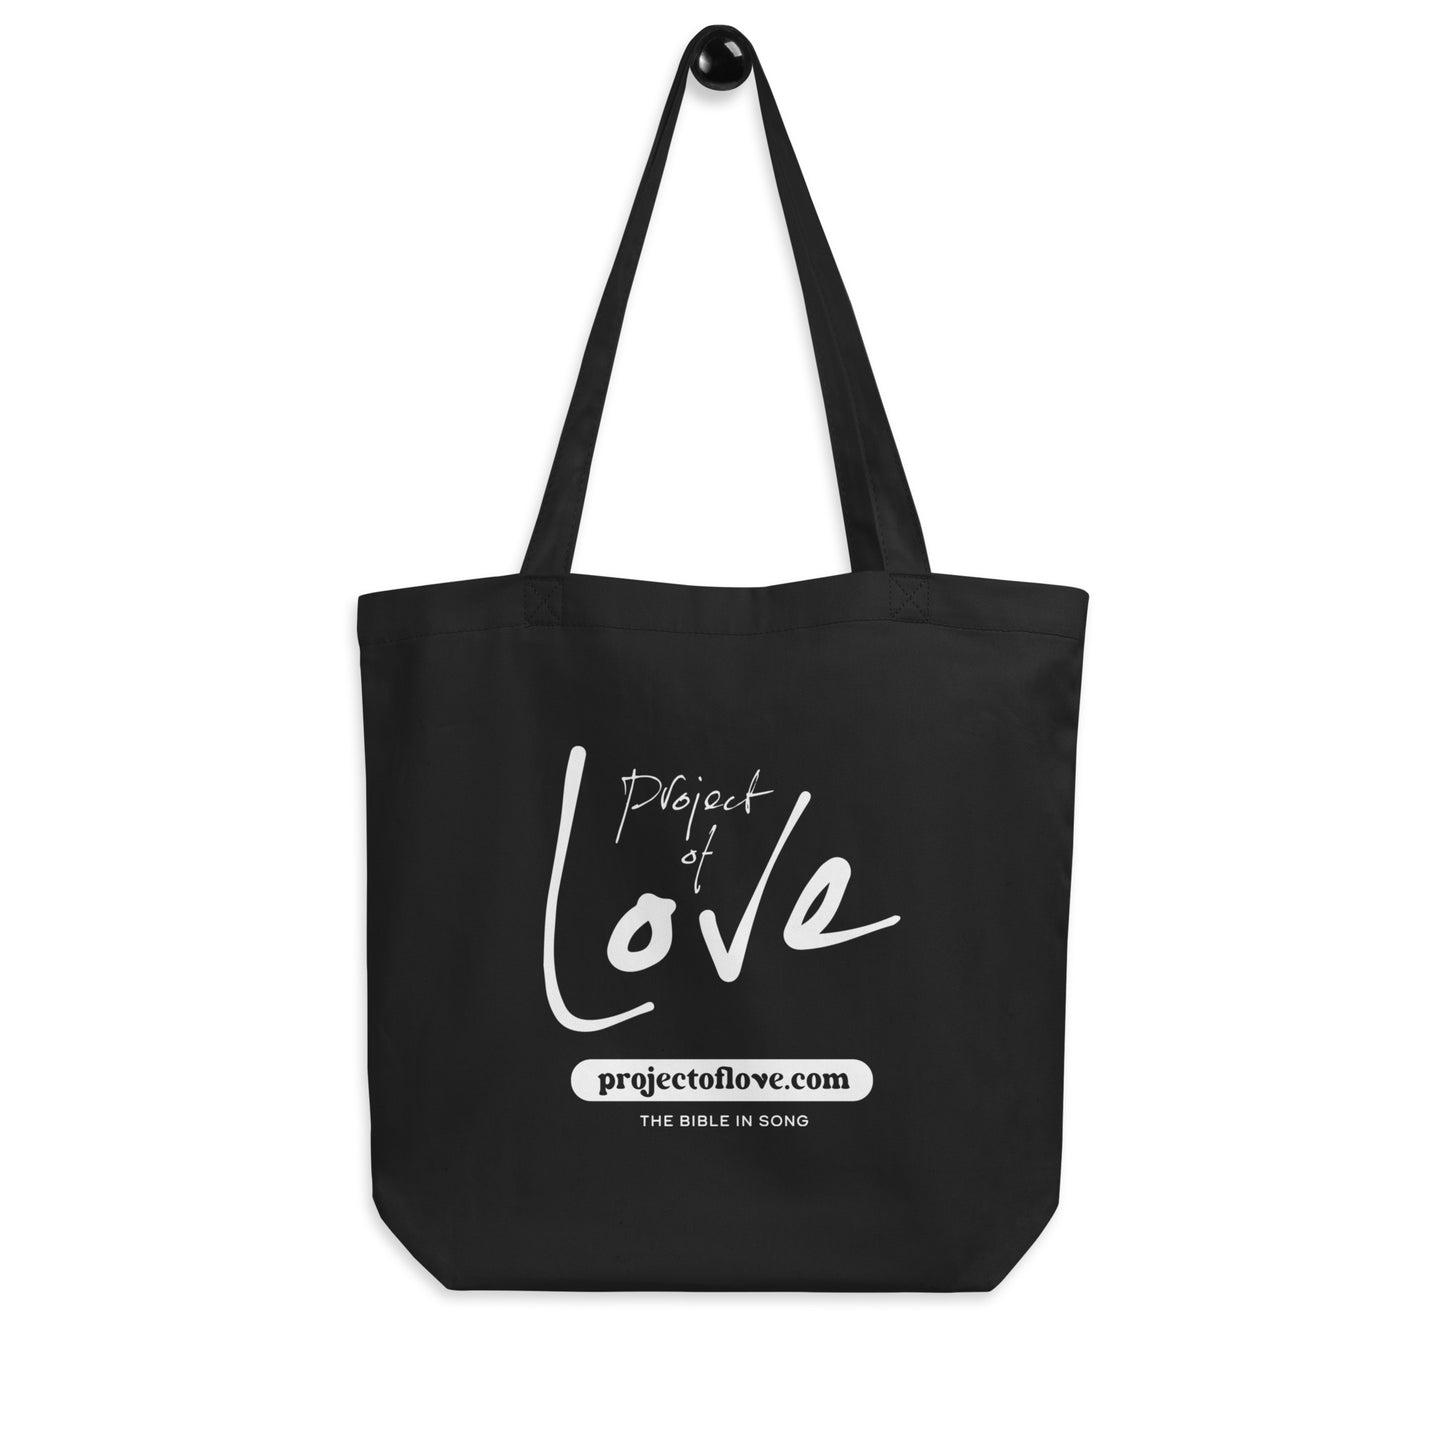 Eco Tote Bag 'Project of Love'